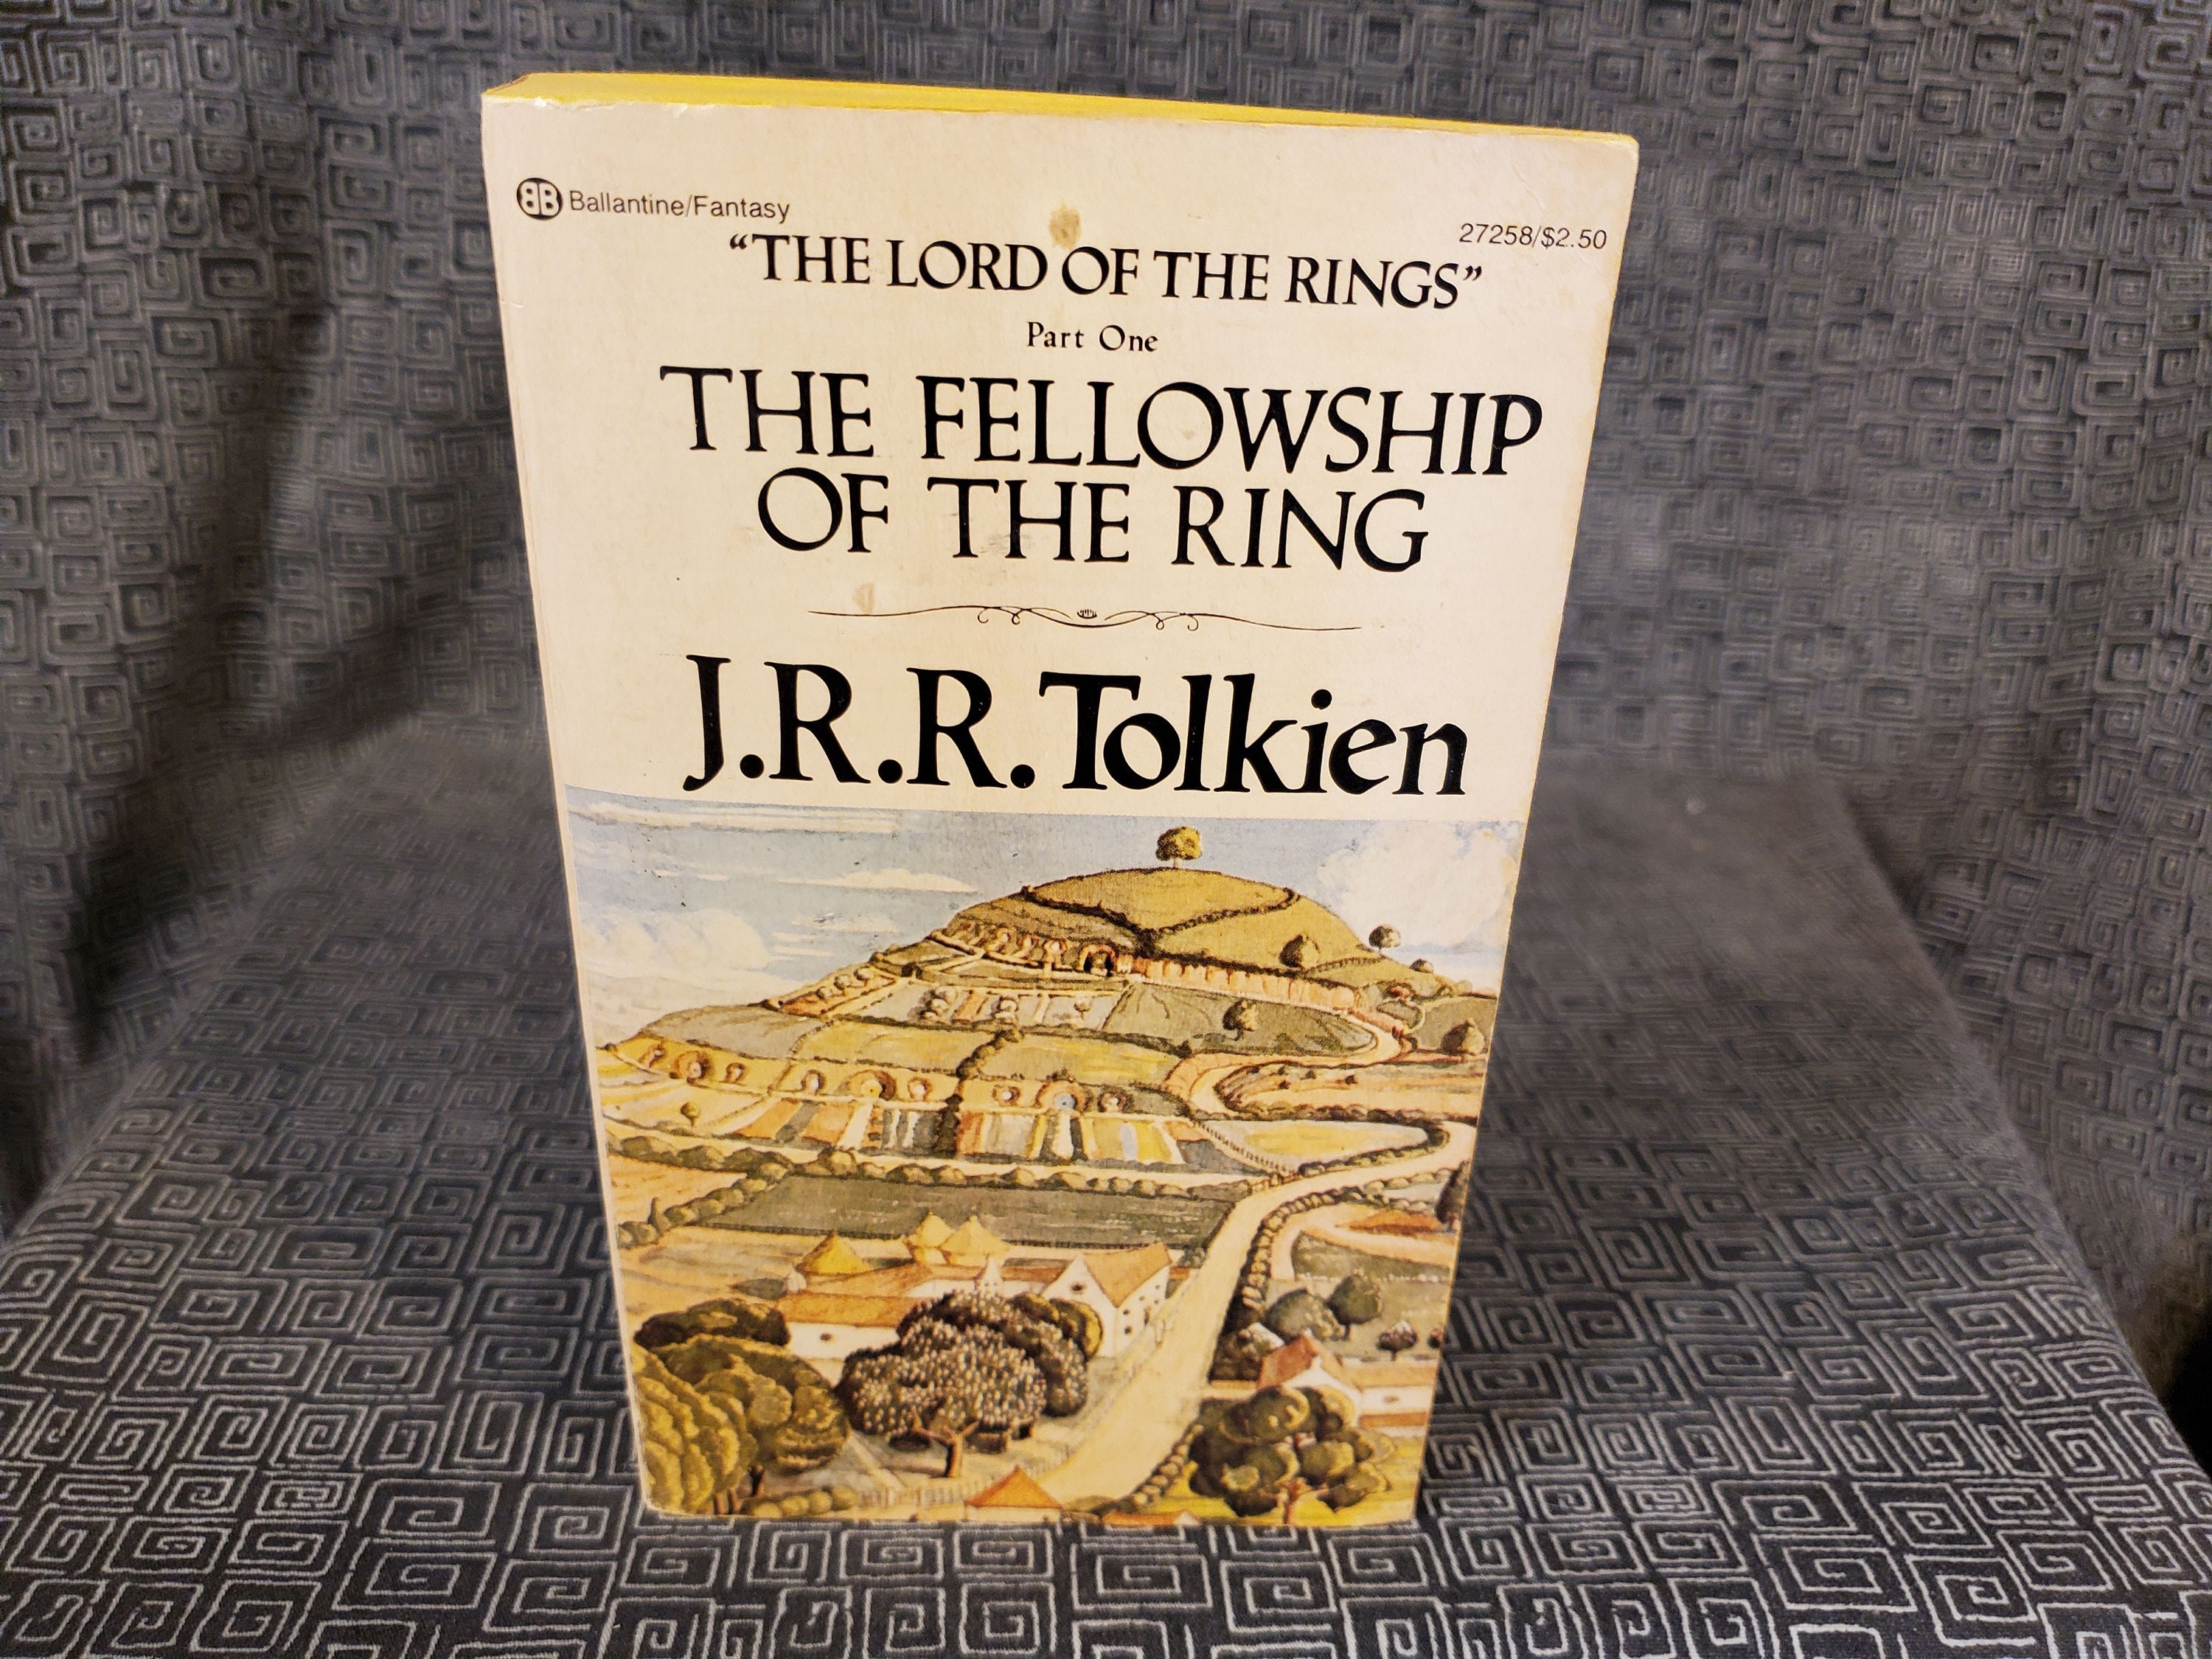 Lord Of The Rings Book Gifts Jrr Tolkien Set Decor Hardcover Books Hobbit  Merch Bookends Gift Collectibles Lotr Ring Journal Leather Bound  Merchandise